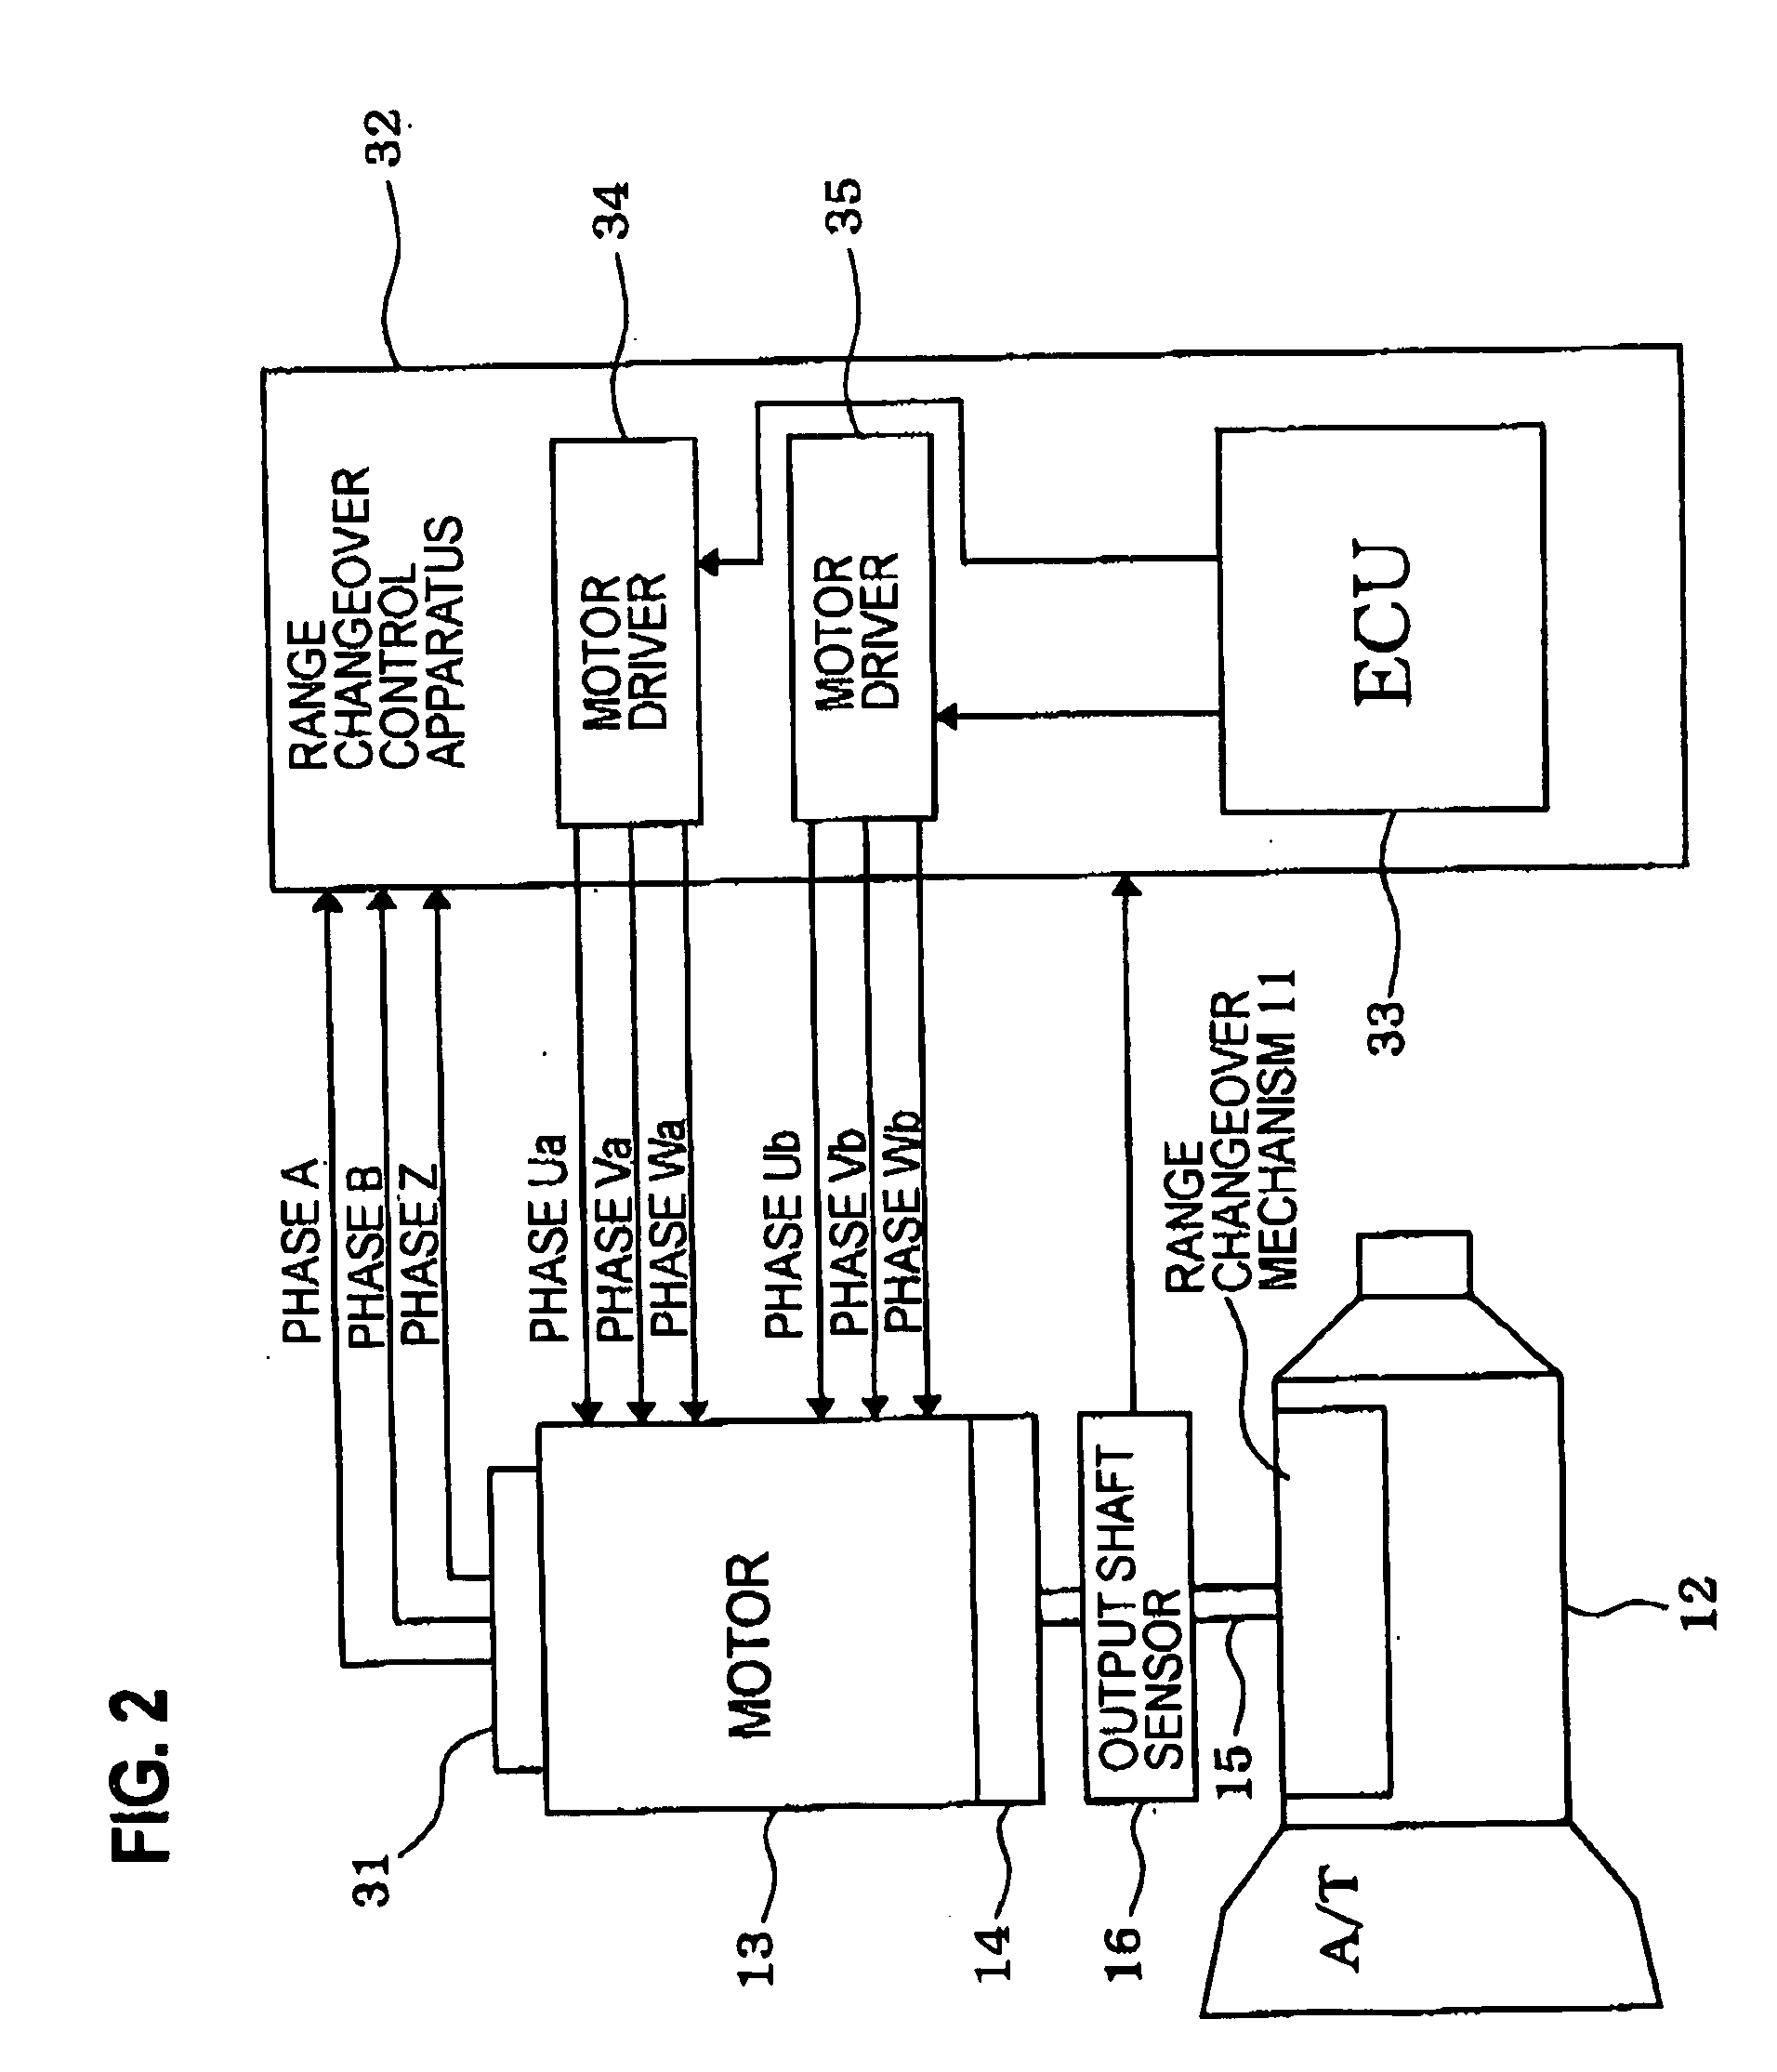 Motor control apparatus for controlling motor to drive output shaft with positioning accuracy unaffected by backlash in rotation transmission system